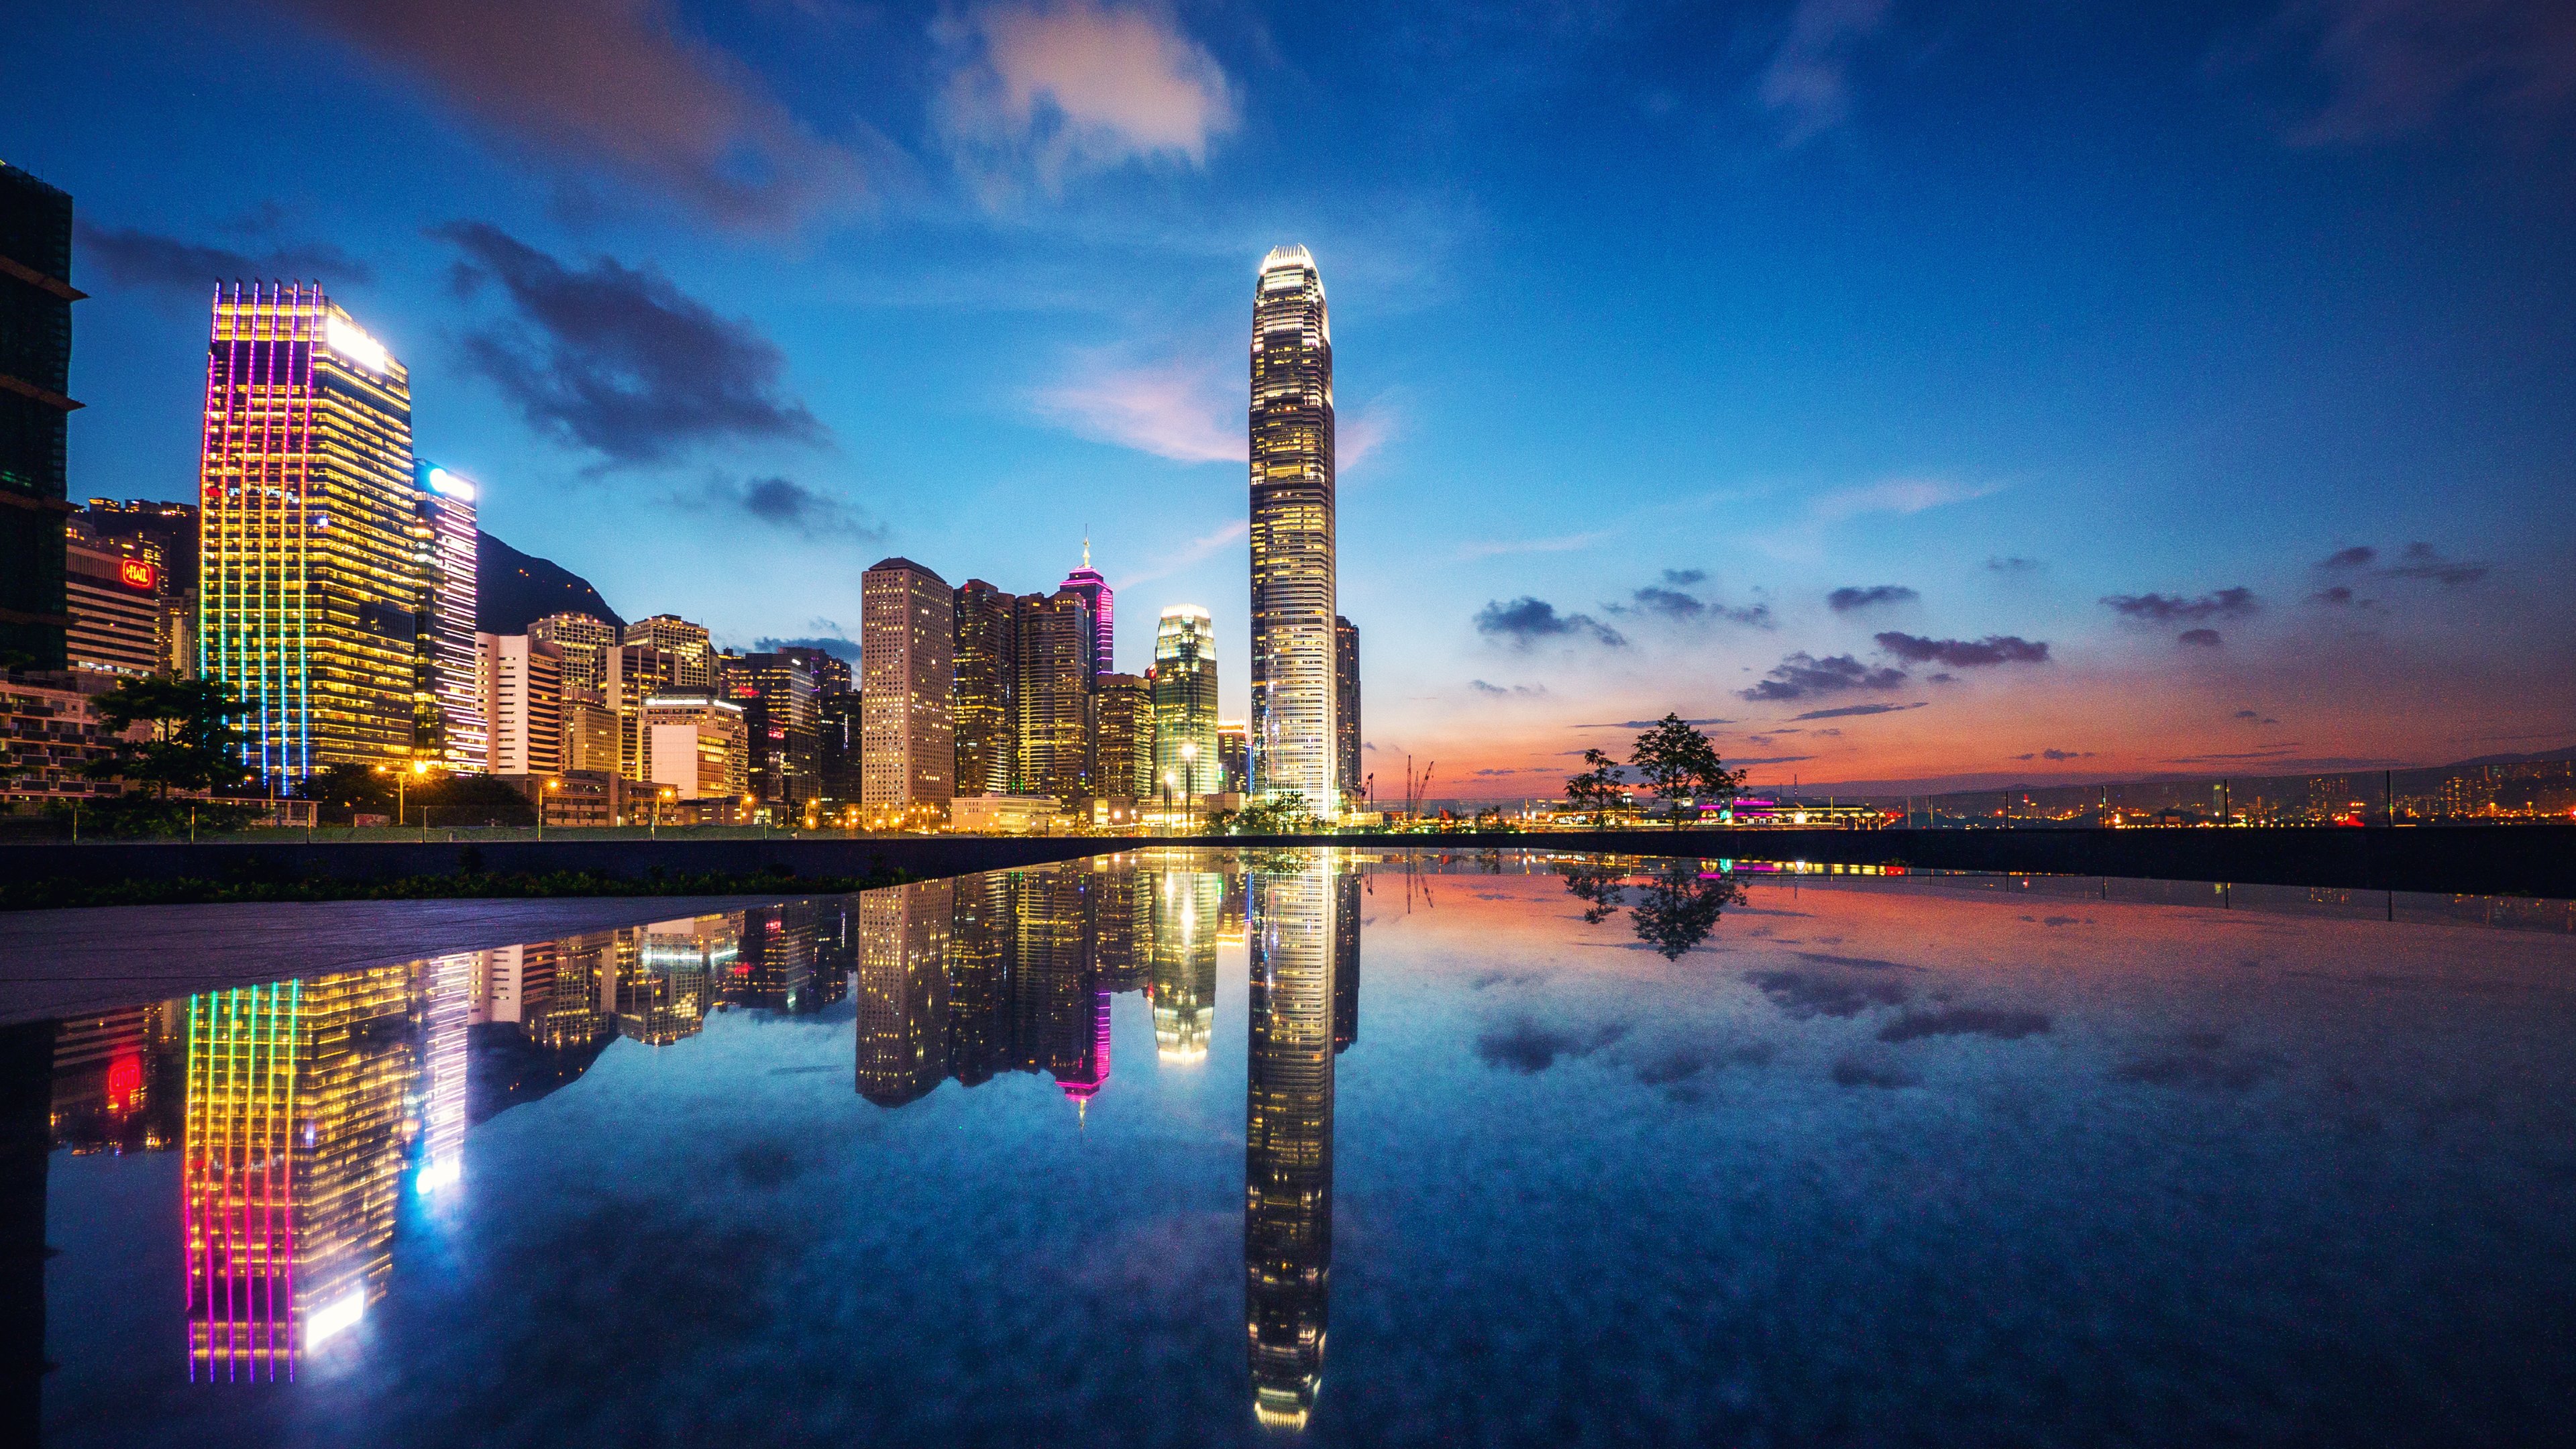 cityscape, man made, building, reflection, architecture, hong kong, cities, twilight